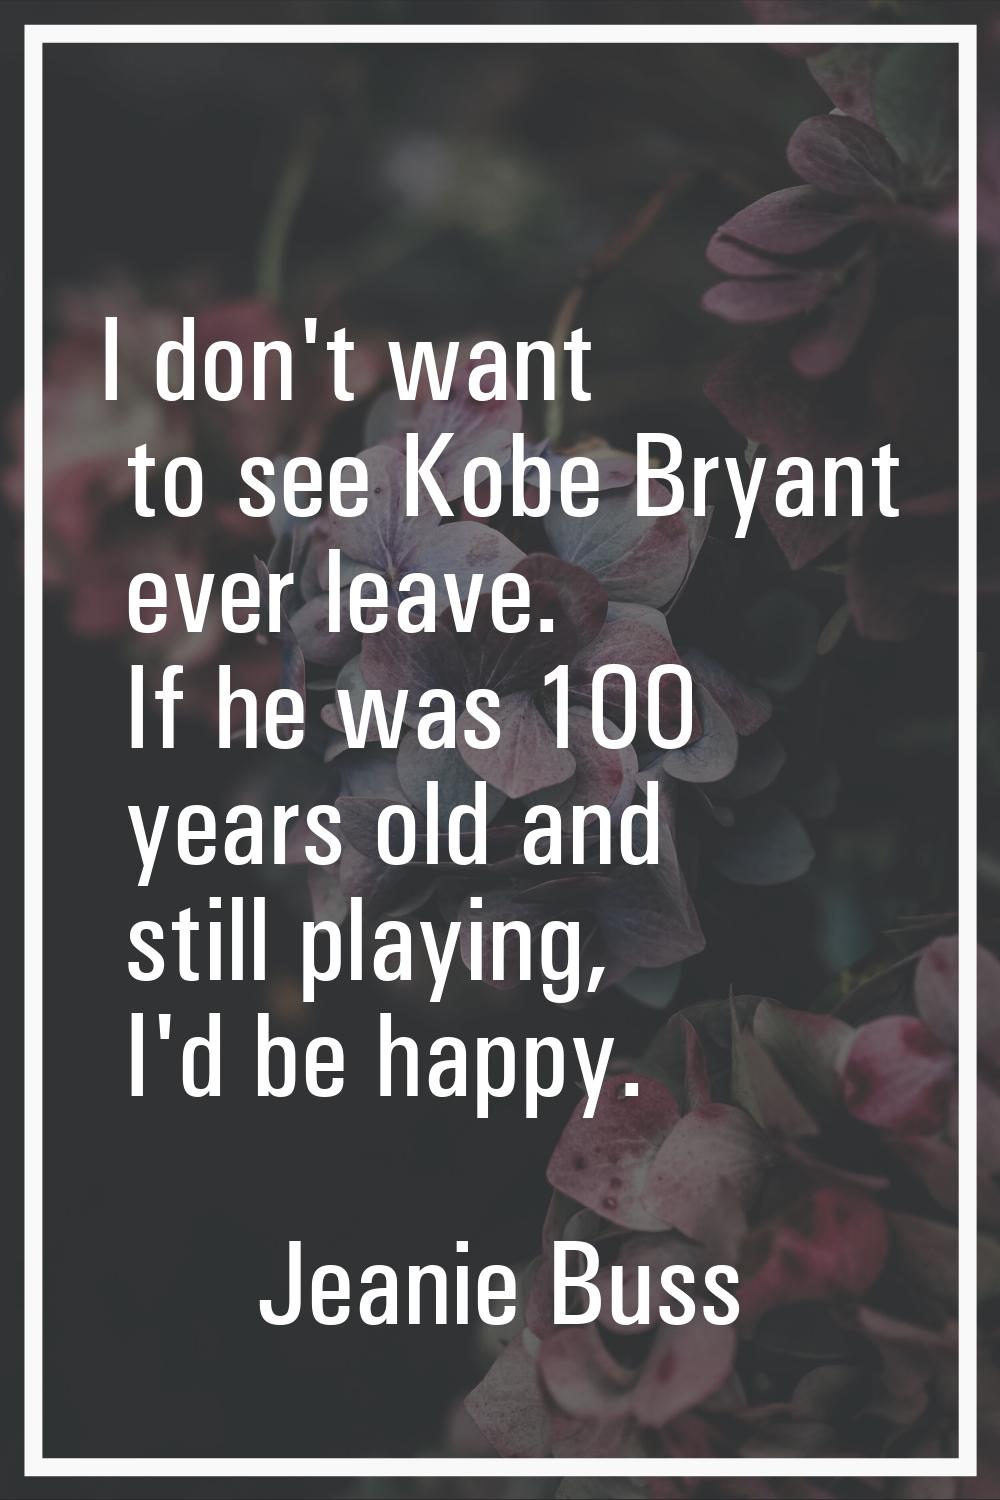 I don't want to see Kobe Bryant ever leave. If he was 100 years old and still playing, I'd be happy